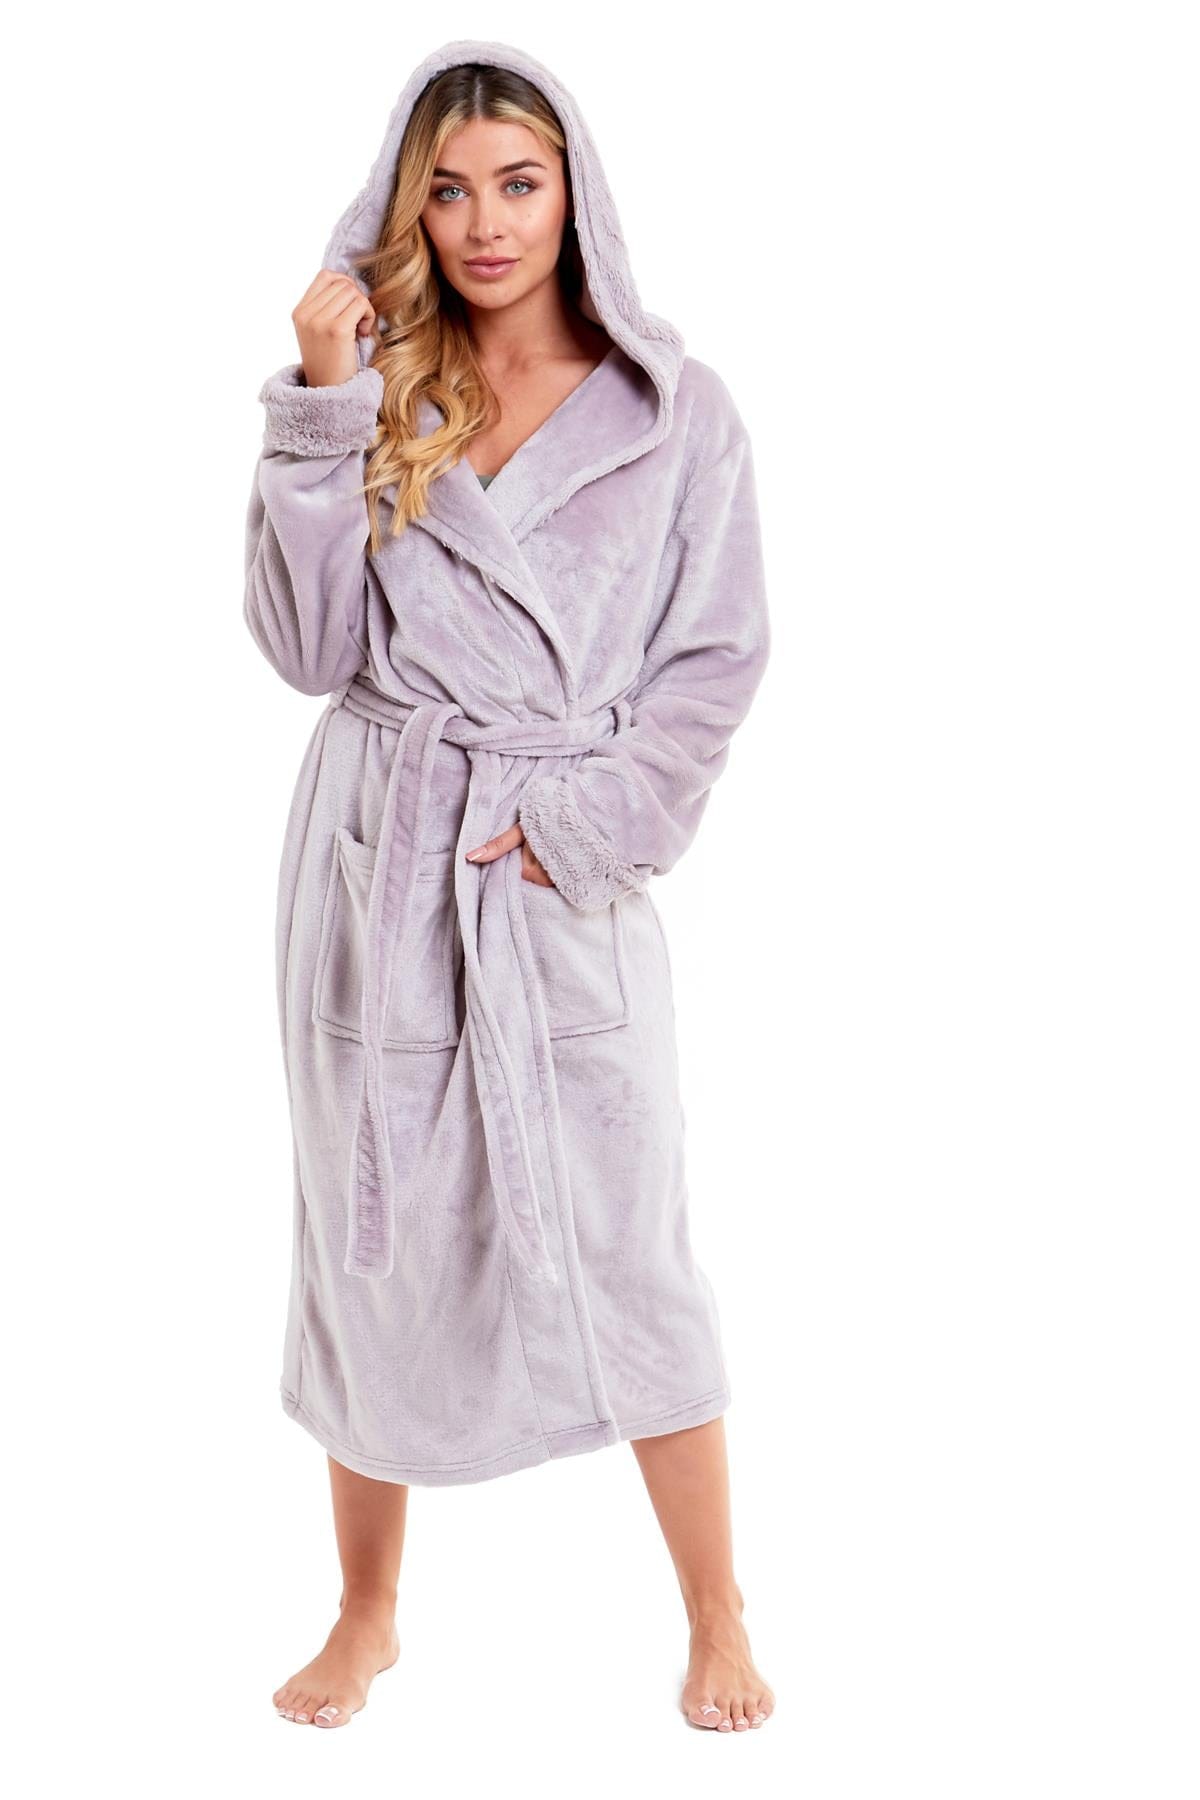 The Company Store Air Layer Women's Extra Large Off White Cotton Robe  67046-XL-OFFWHITE - The Home Depot